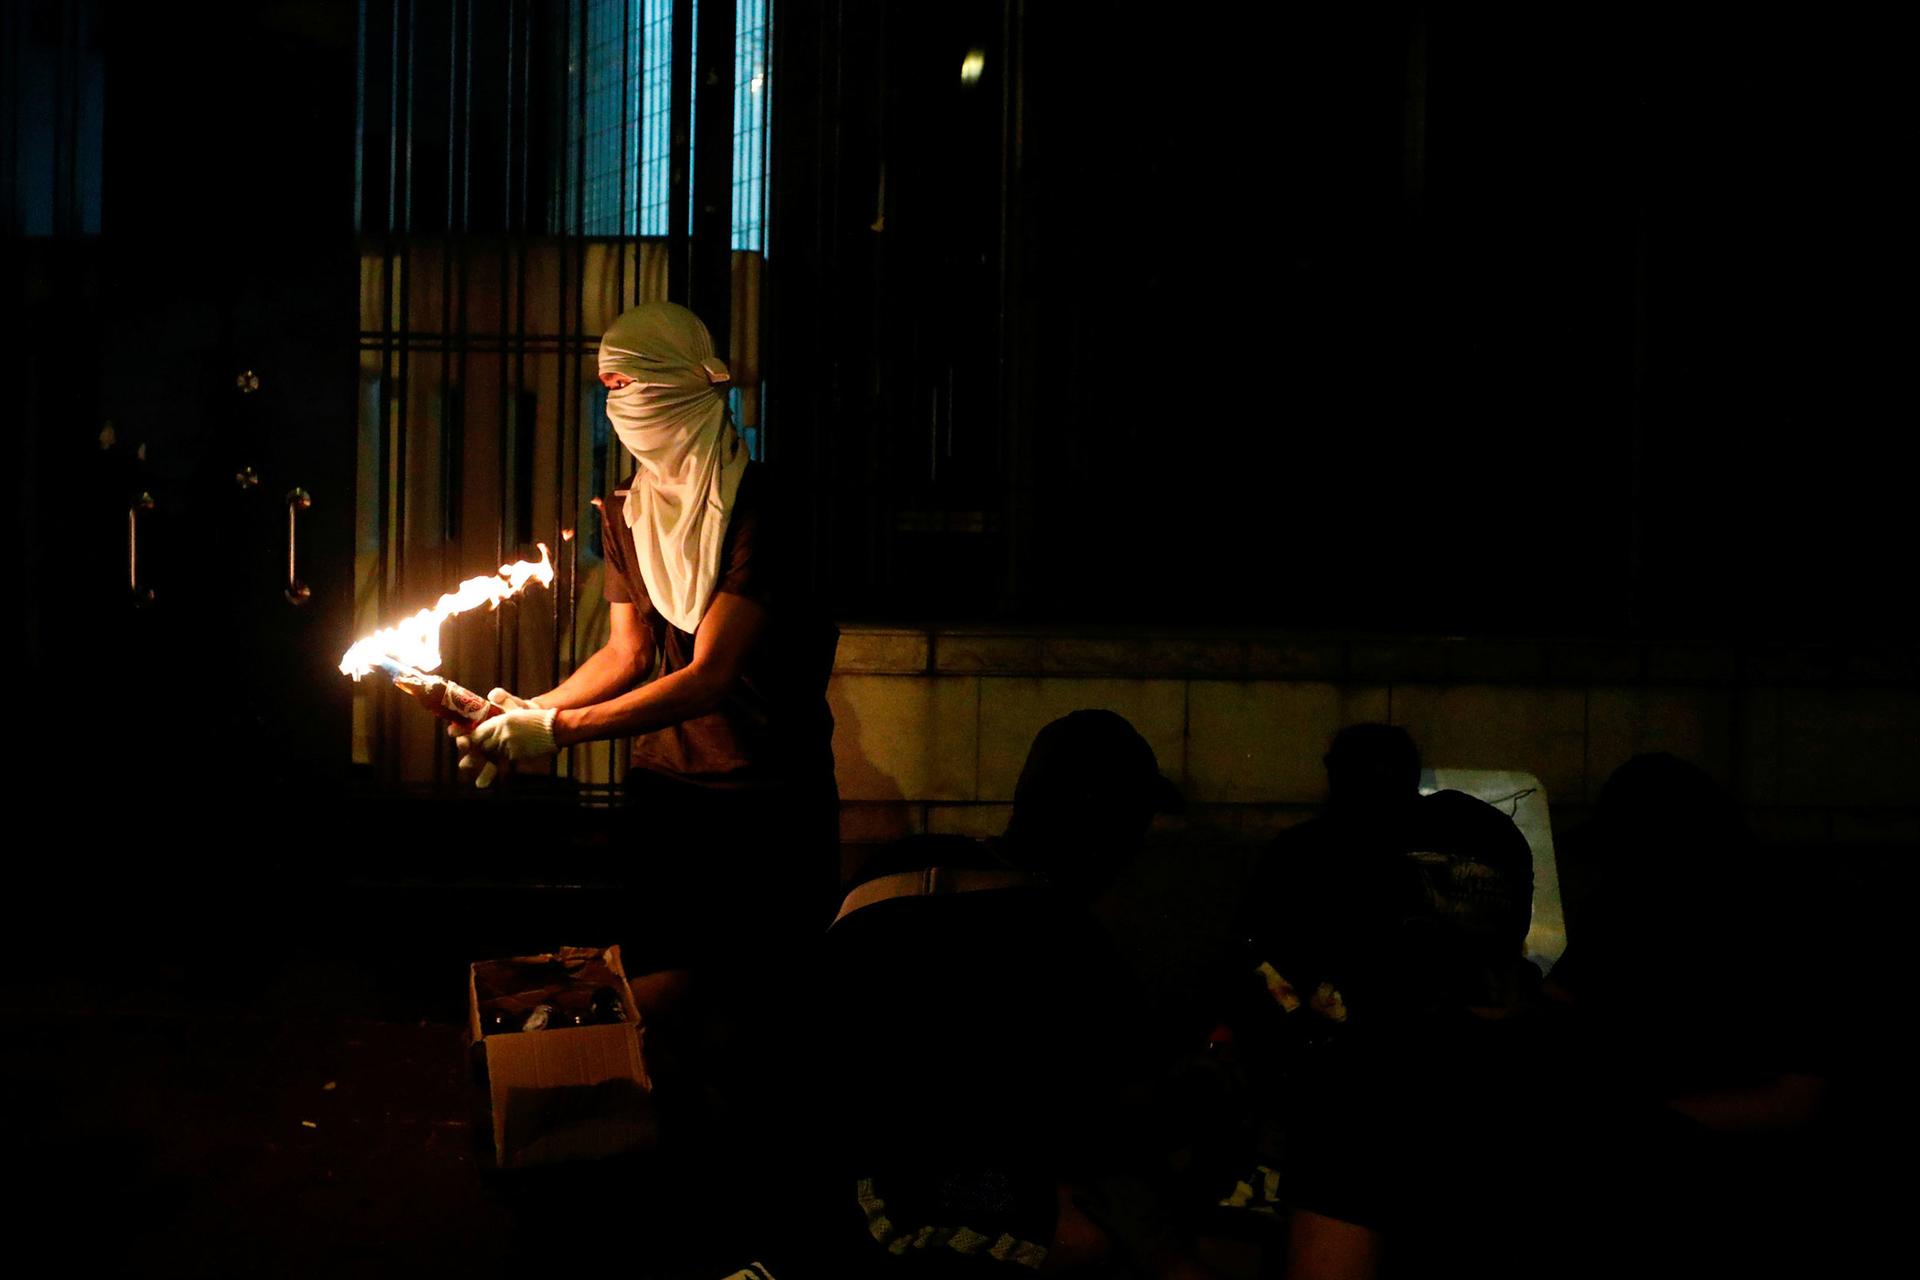 An anti-government protester is shown holding a Molotov cocktail set ablaze and wearing white mask covering his face and head.